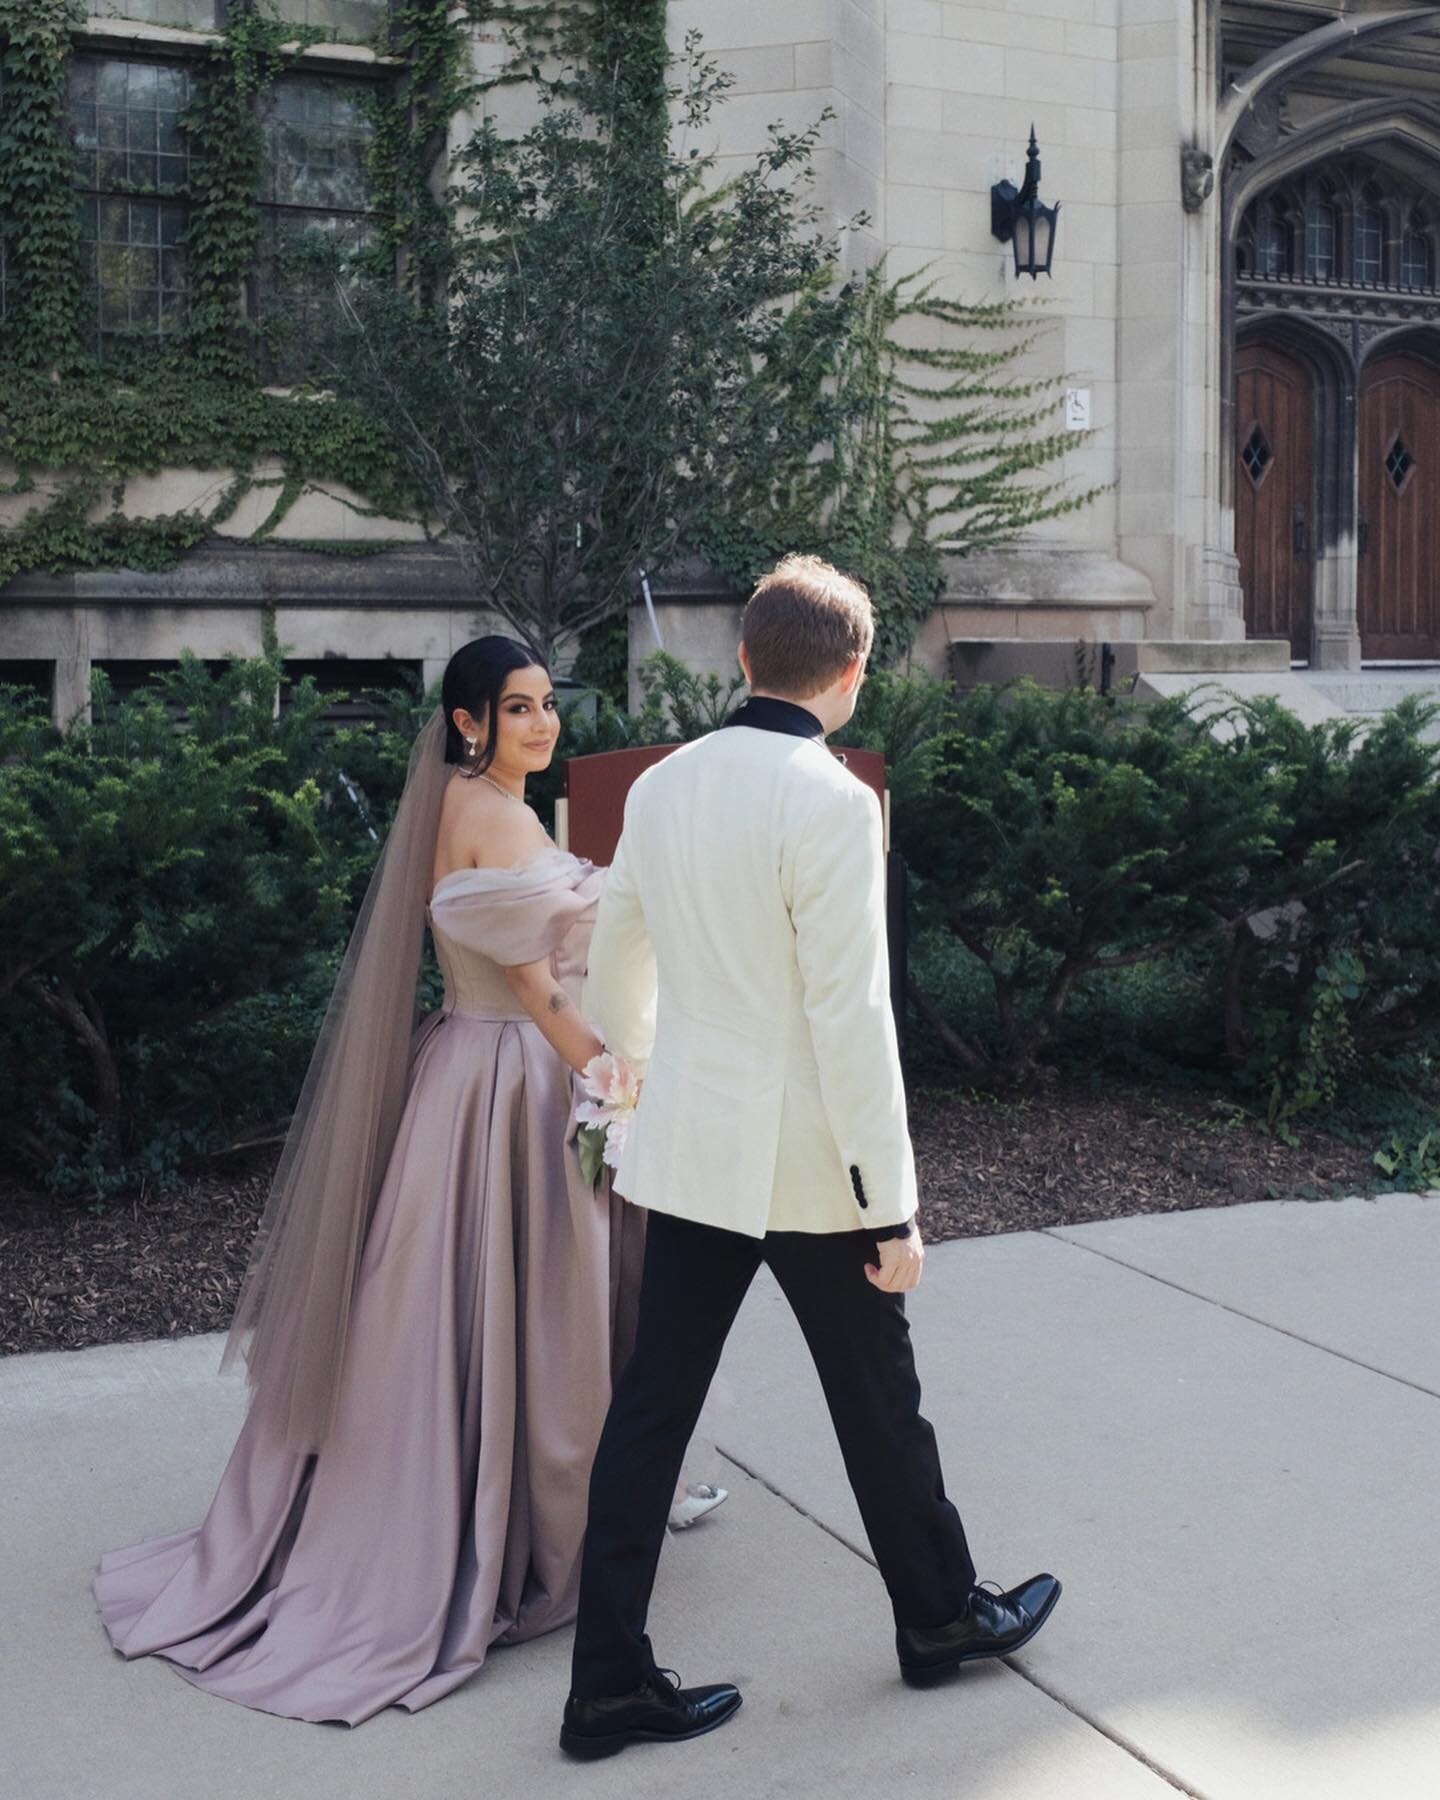 Moments from Manpreet &amp; Gabe's wedding in Chicago. I photographed Gabe's secret proposal at the Metropolitan Museum of Arts back in 2021, and from that day, an amazing relationship of trust and understanding with this couple has been formed. It f